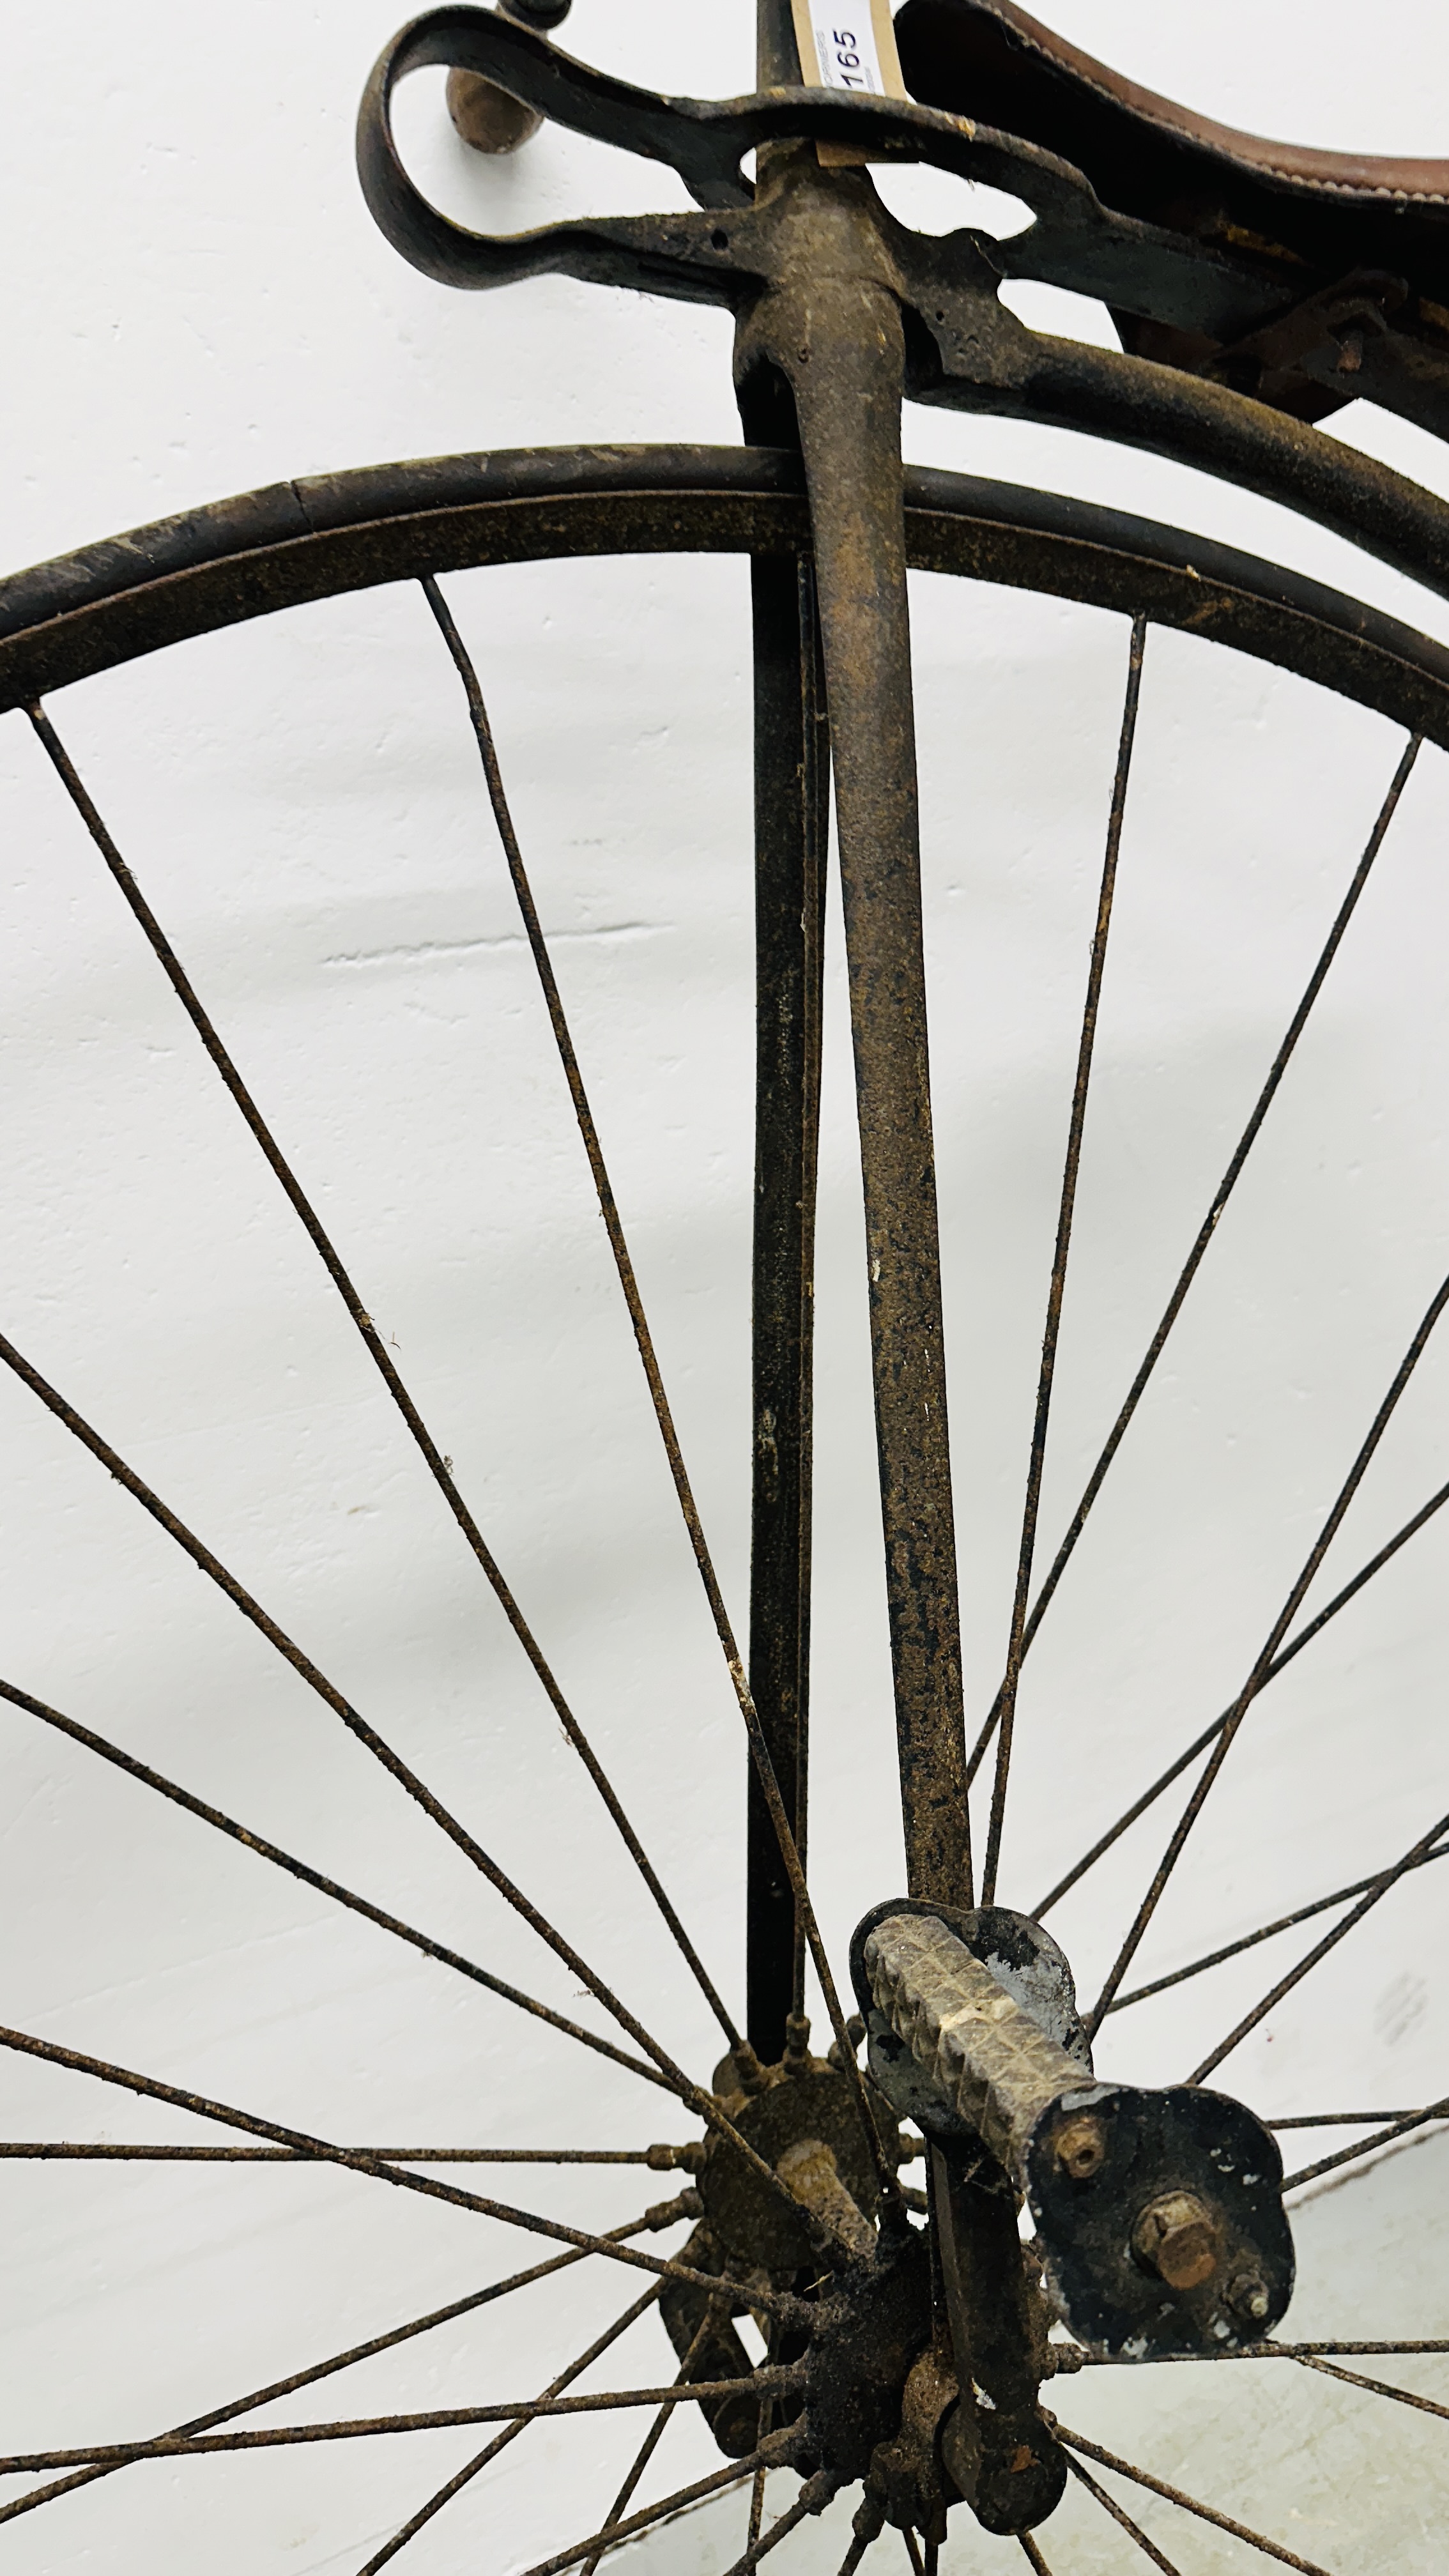 AN ANTIQUE PENNY FARTHING / HIGH WHEEL BICYCLE, HEIGHT 147CM, FRONT WHEEL RIM 119CM. - Image 18 of 20